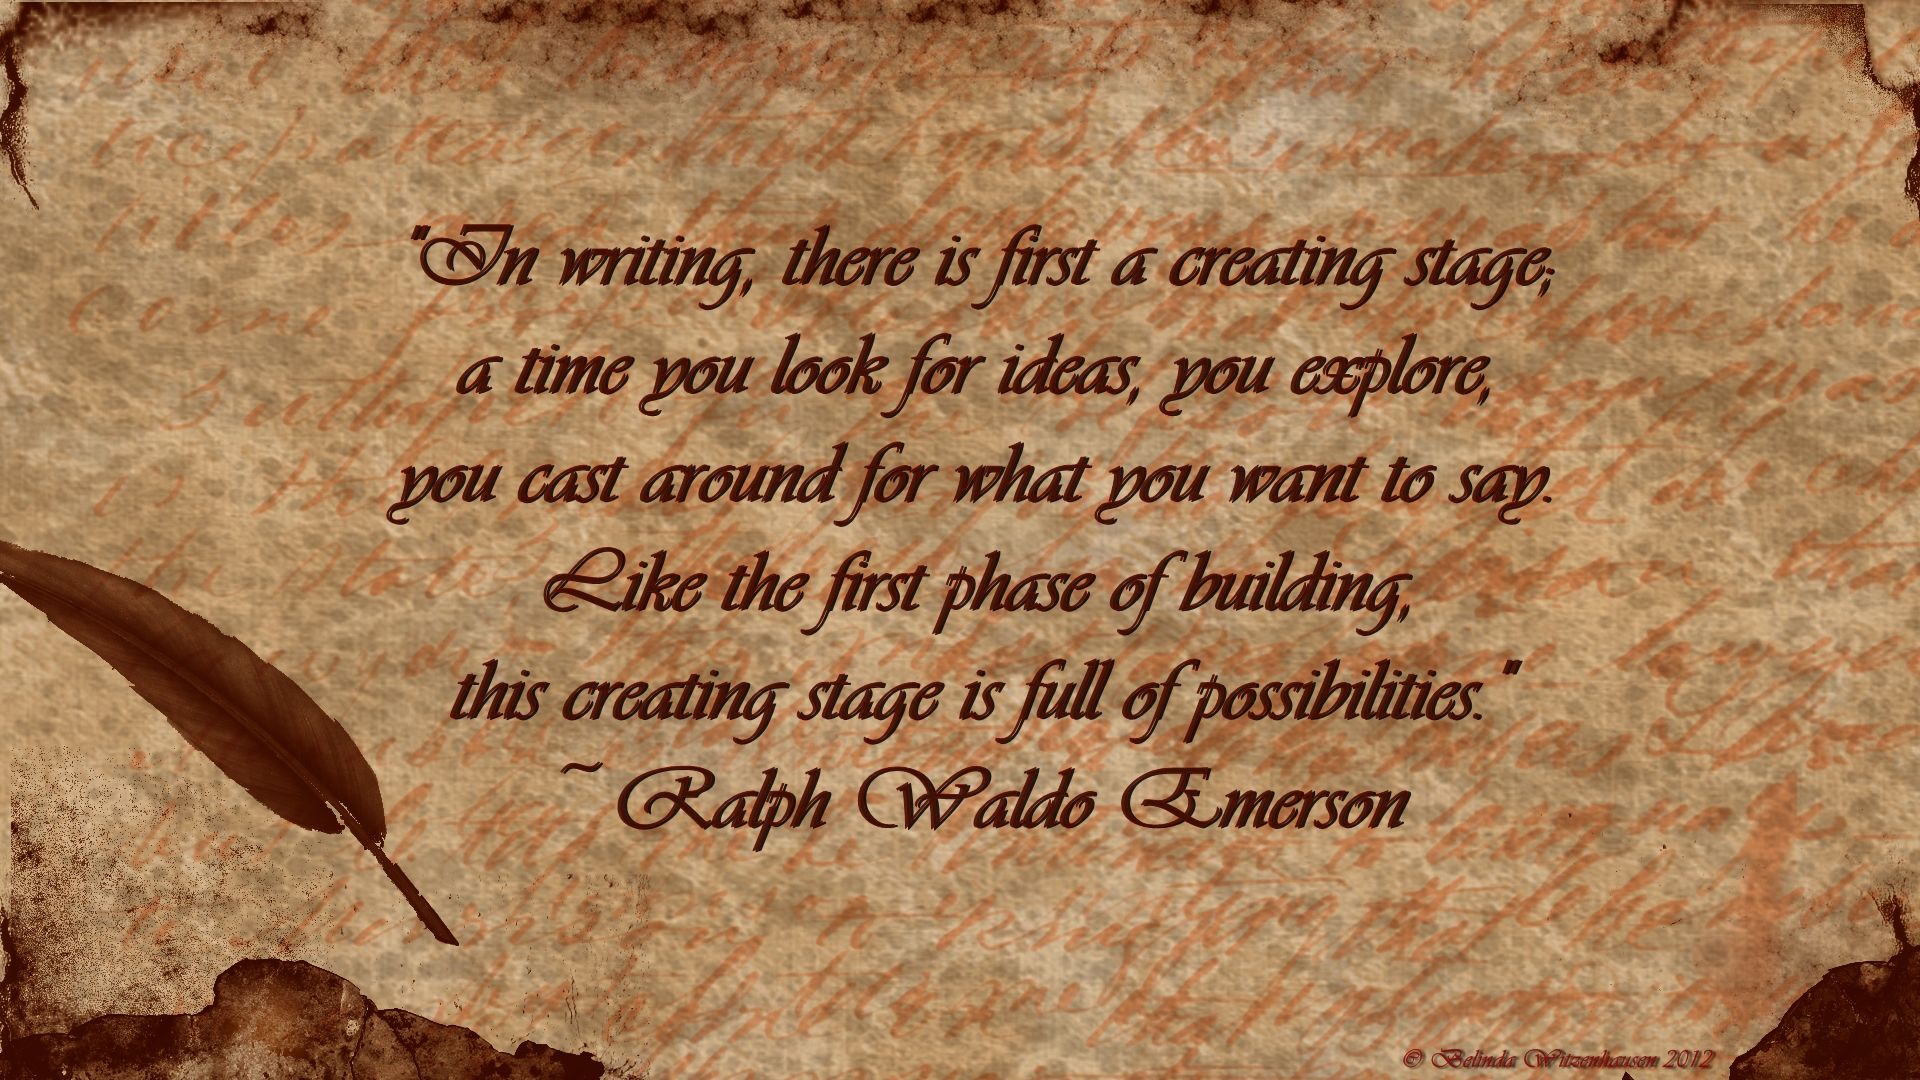 Free download wallpaper graphics for writers tagged quotes